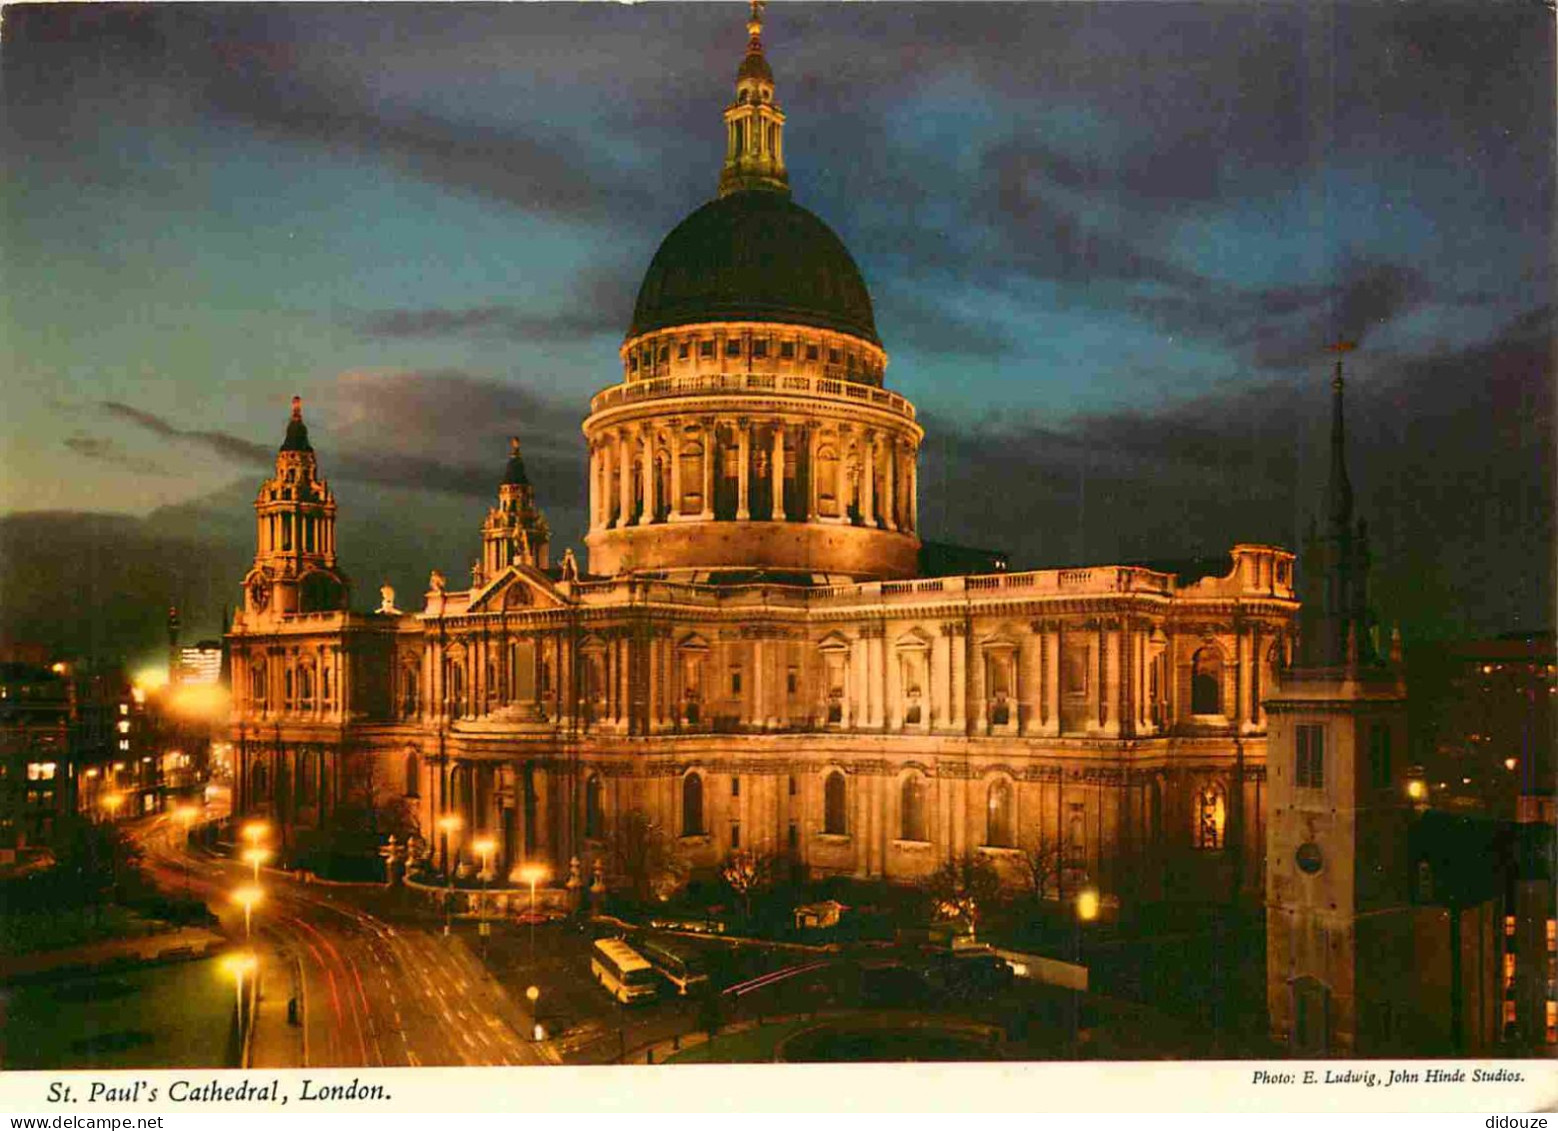 Angleterre - London - St Paul's Cathedral - Cathédrale - By Night - London - England - Royaume Uni - UK - United Kingdom - St. Paul's Cathedral